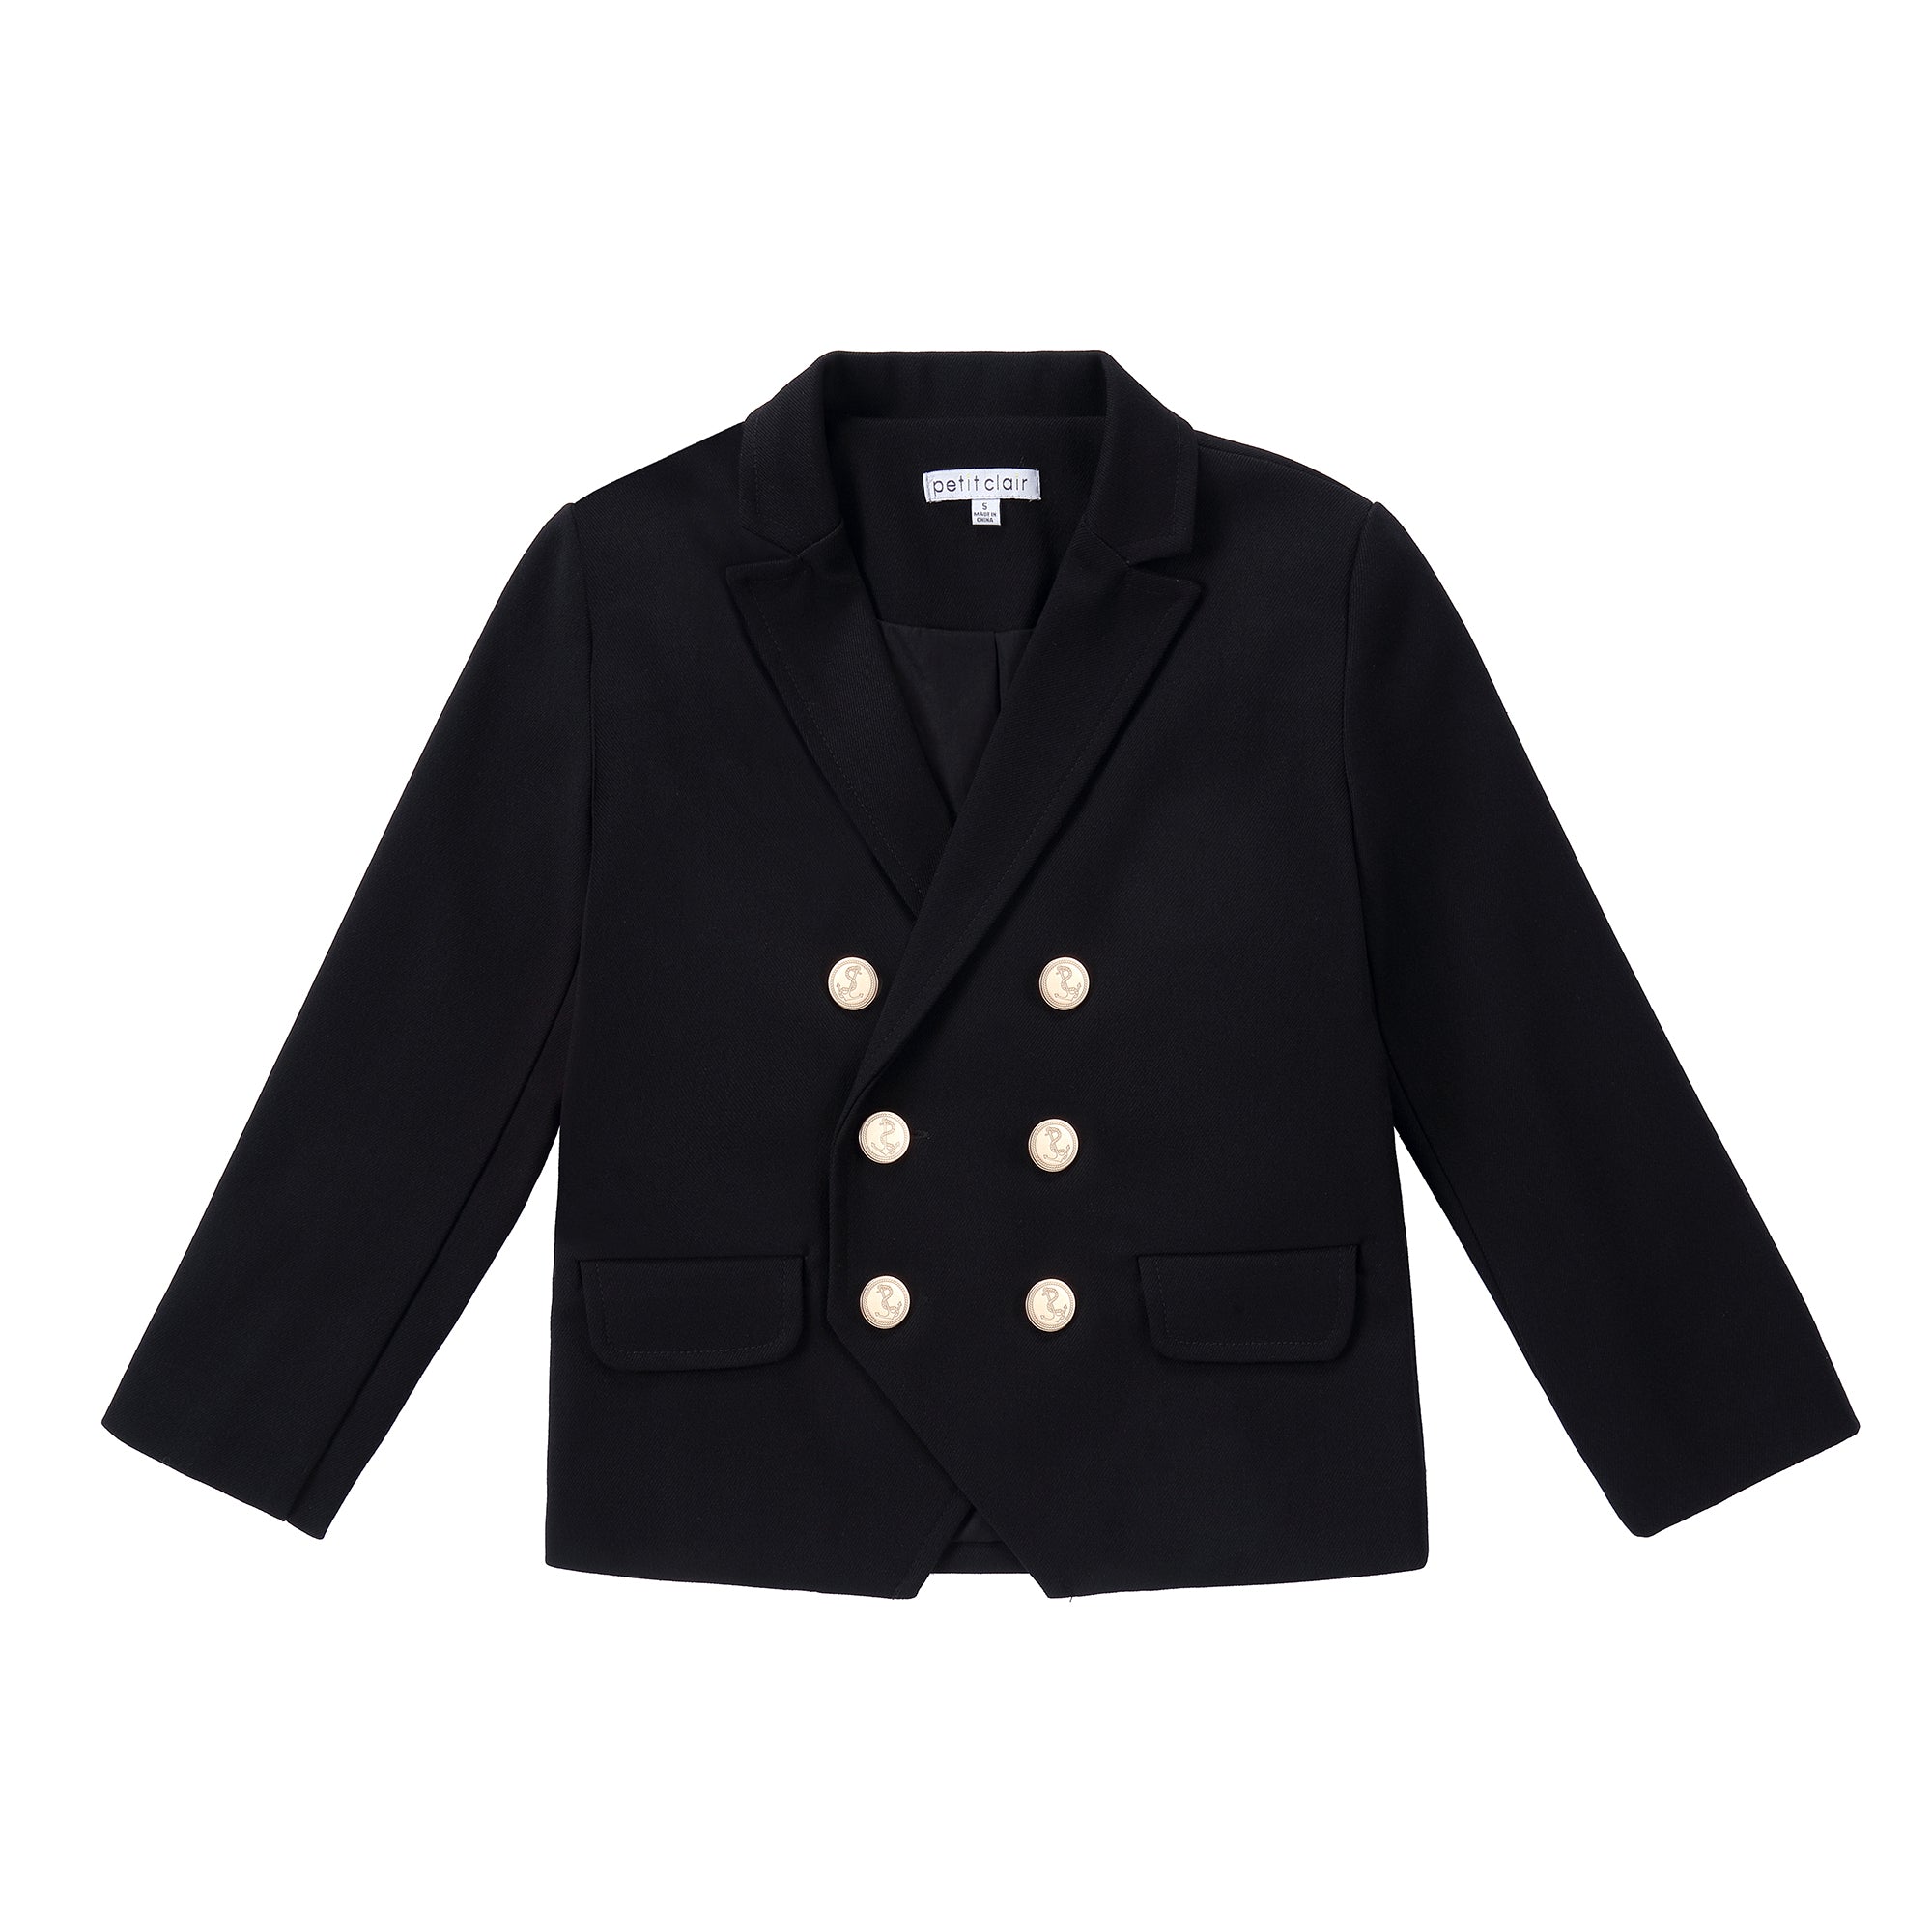 Black Double Breasted Blazer with Gold Button Detail – Petit Clair